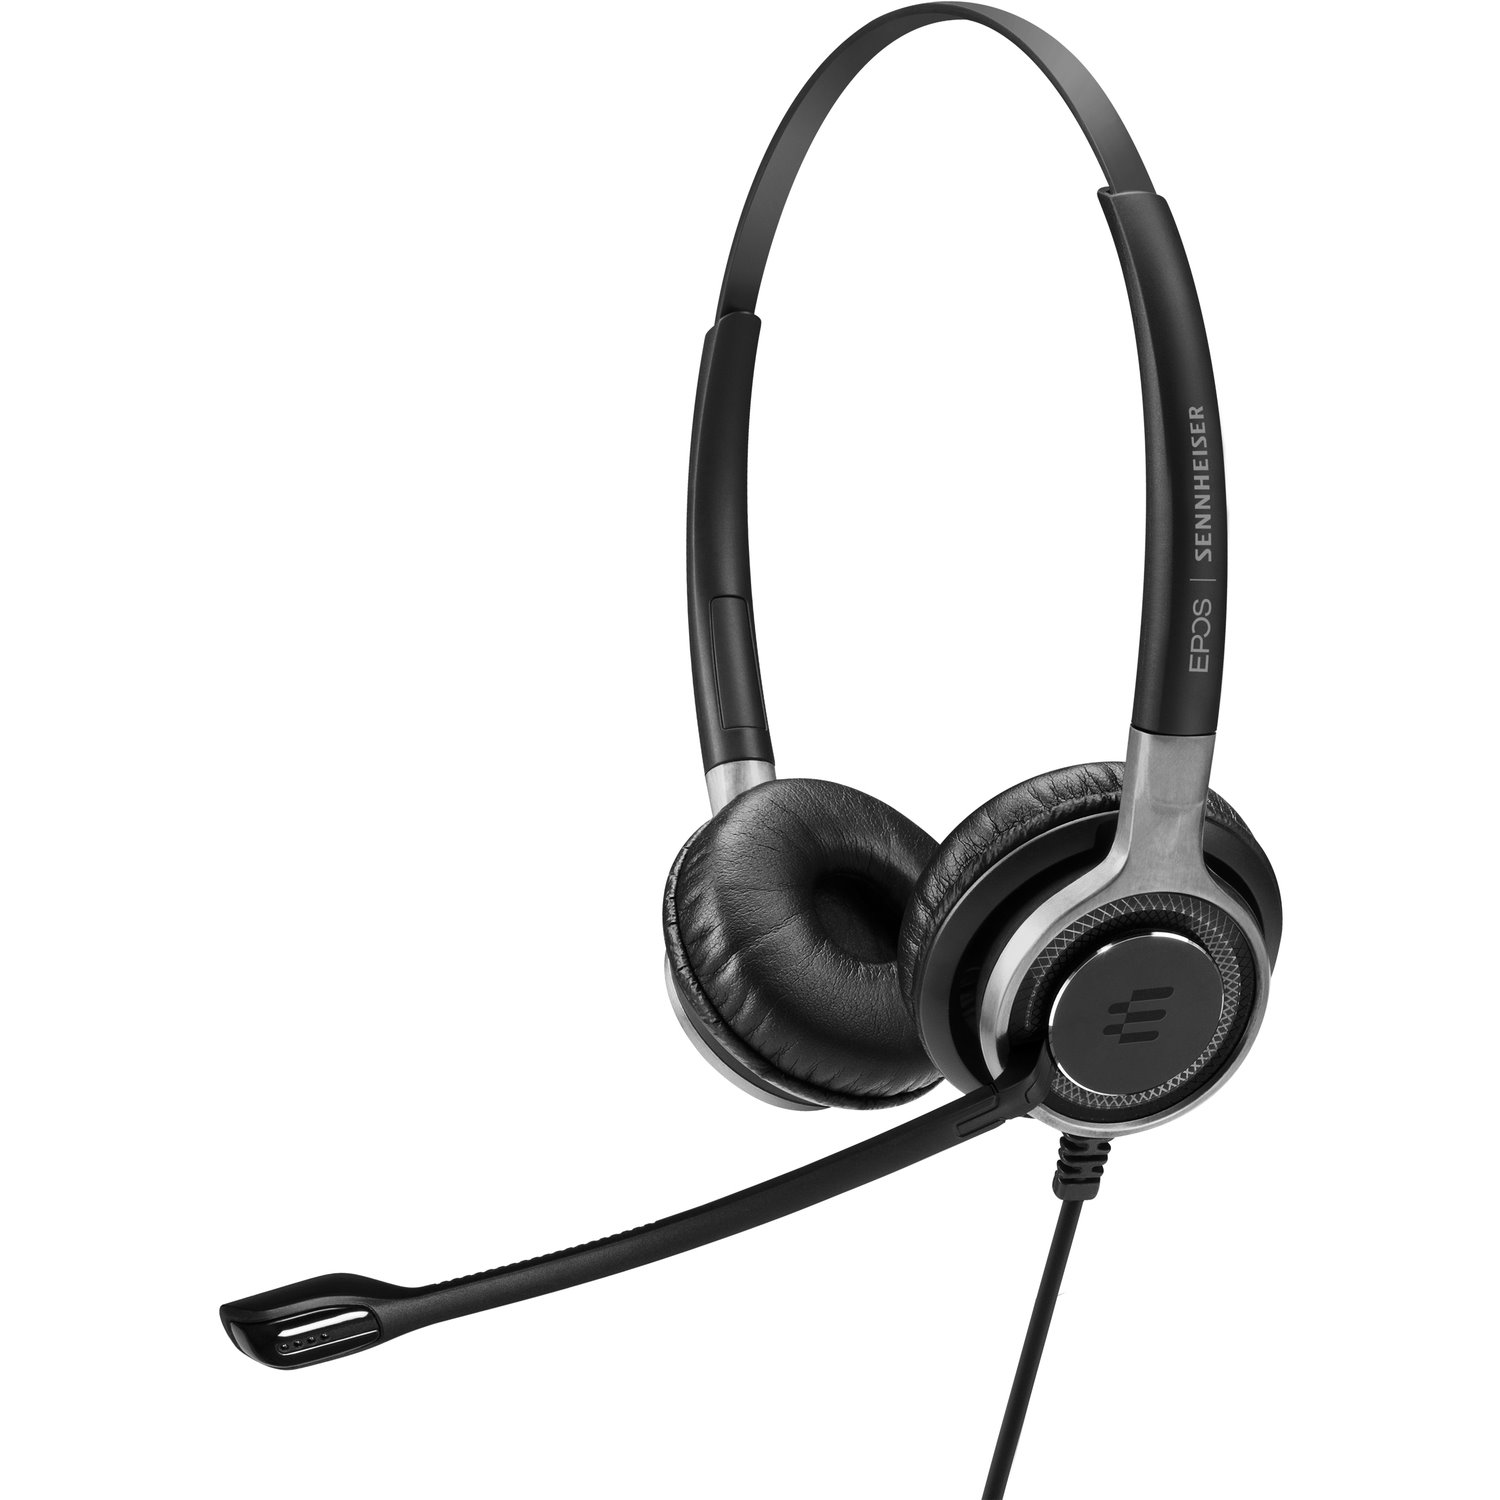 EPOS IMPACT SC 668 Wired On-ear Stereo Headset - Black, Silver